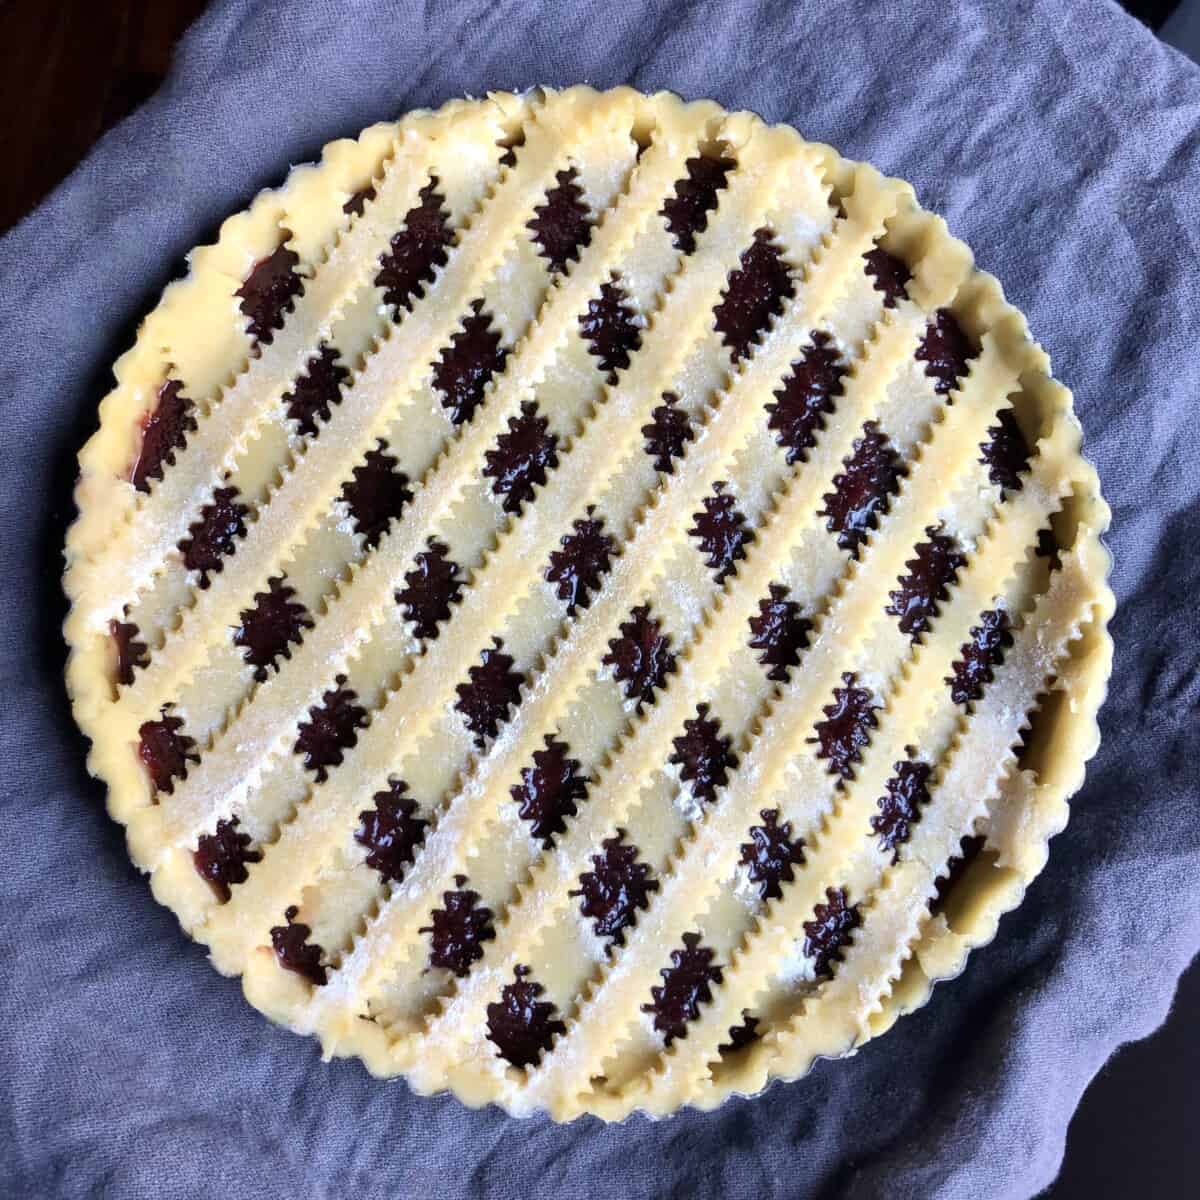 a fully decorated zigzagged lattice topped Italian jam tart in a diamond or argyle pattern